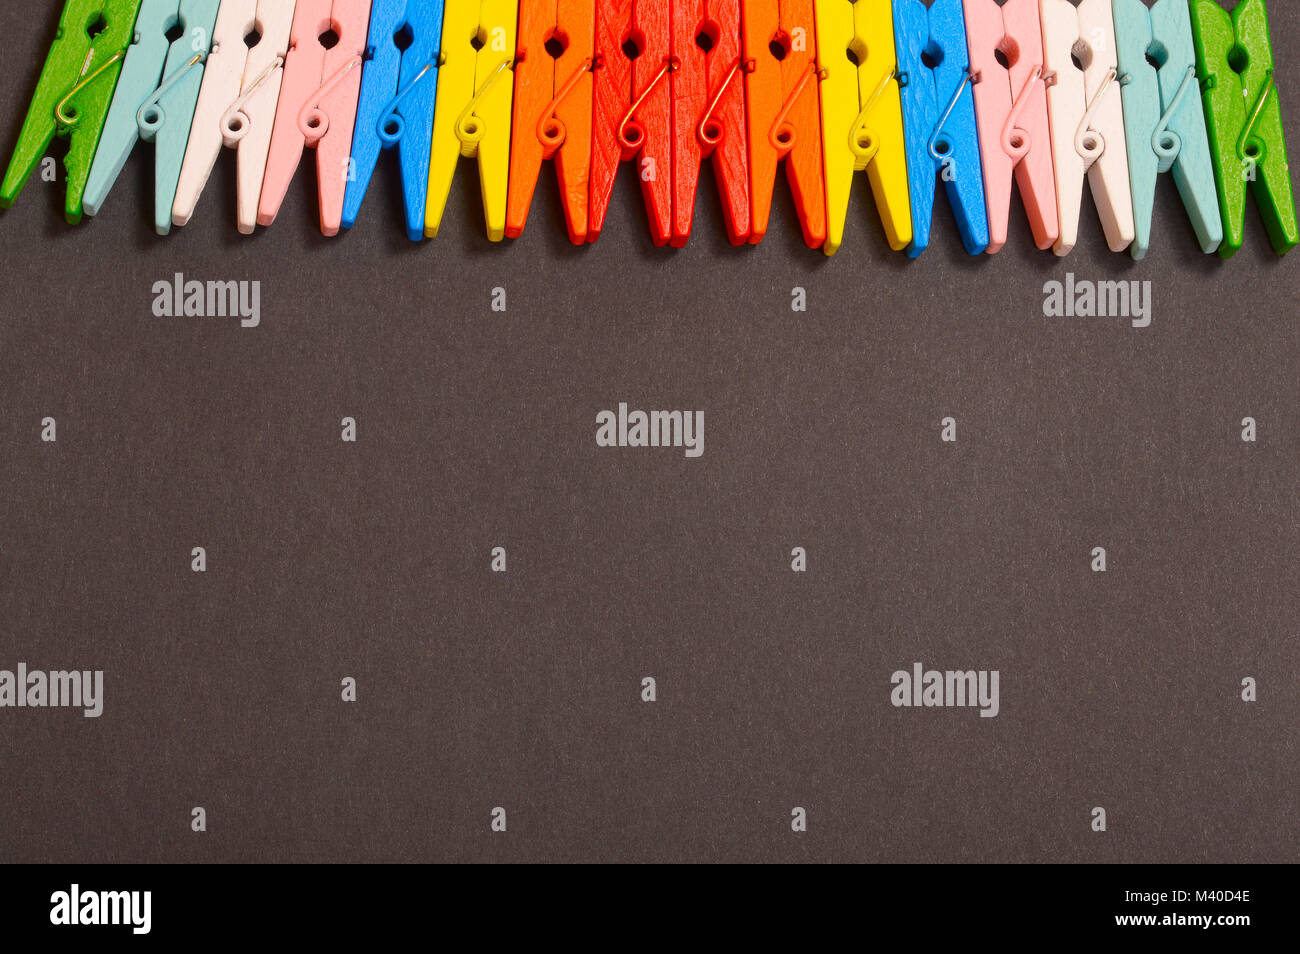 Colorful clothespins on black background Stock Photo